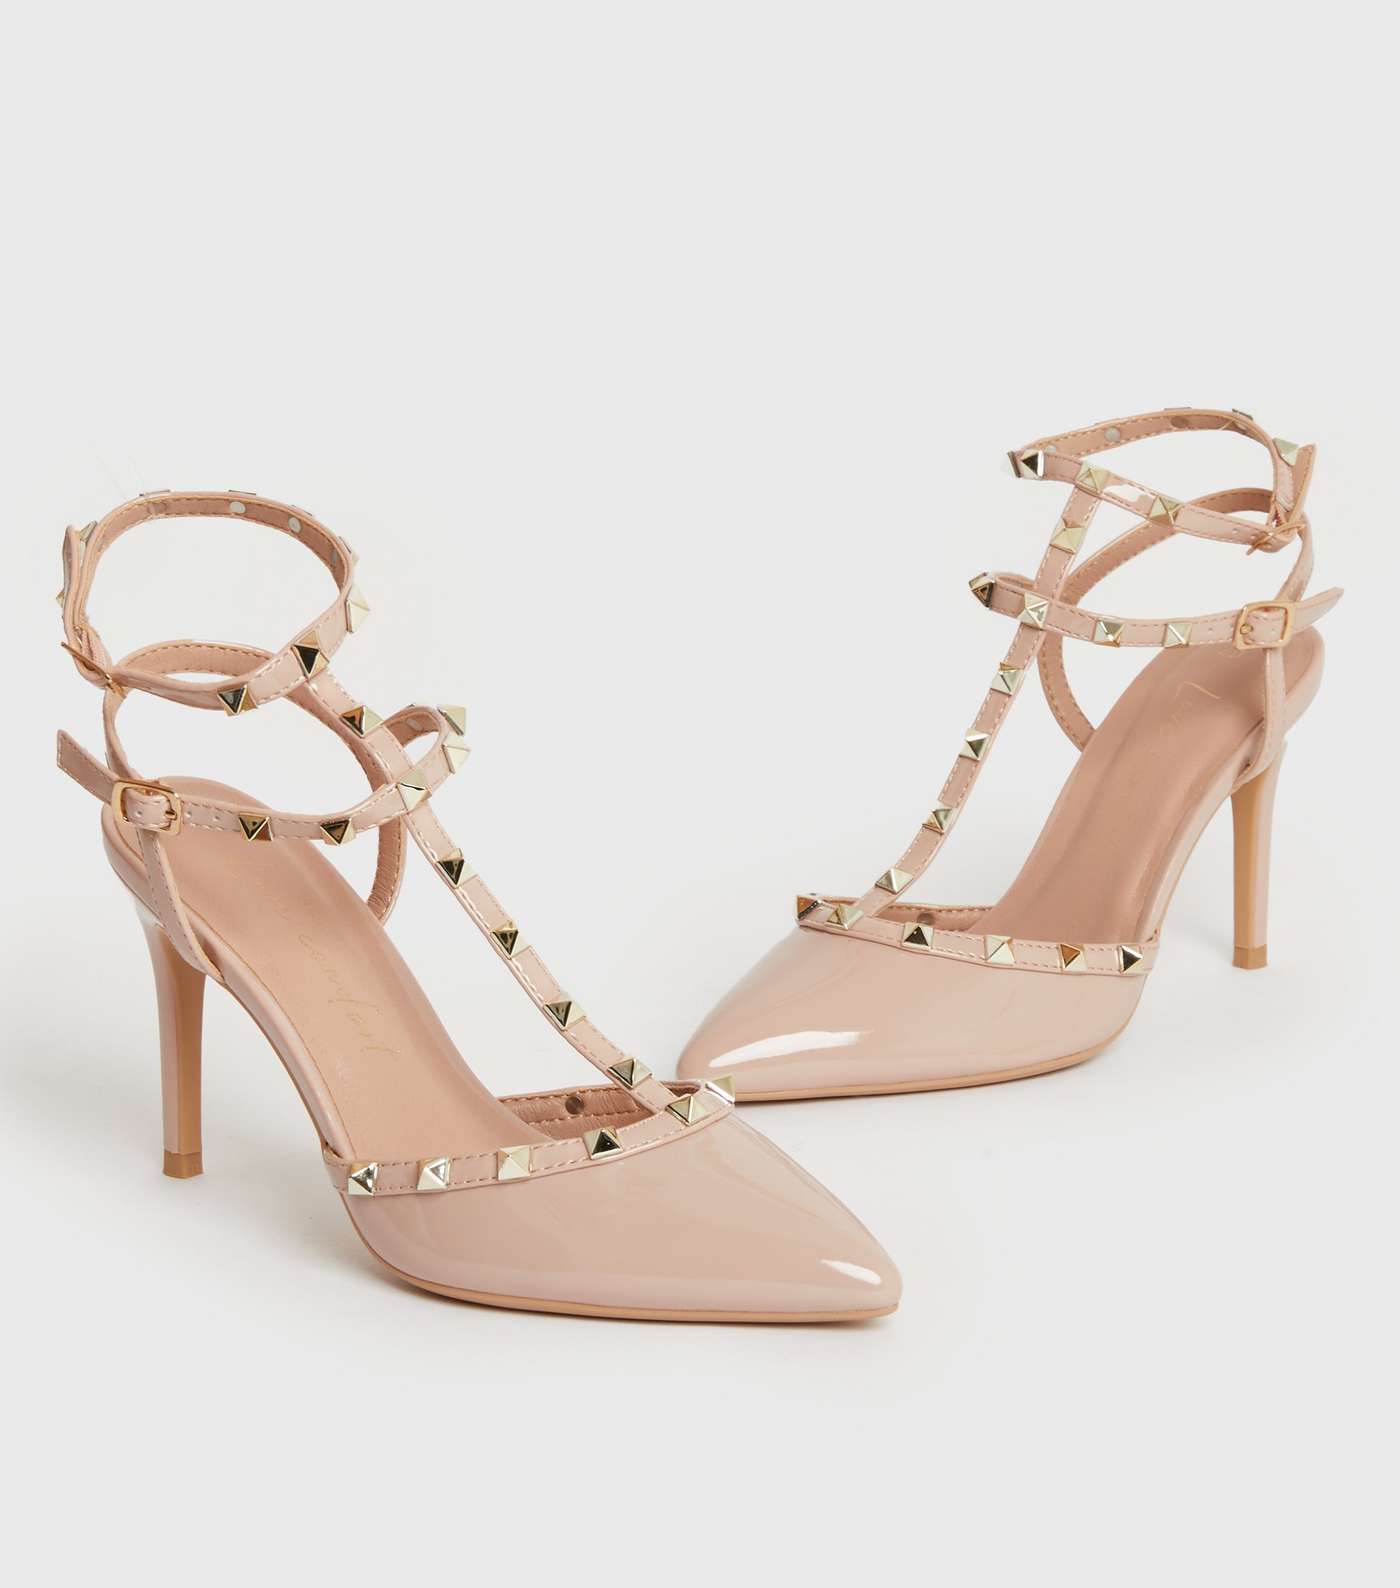 Pale Pink Patent Studded Caged Stiletto Heel Court Shoes Image 3